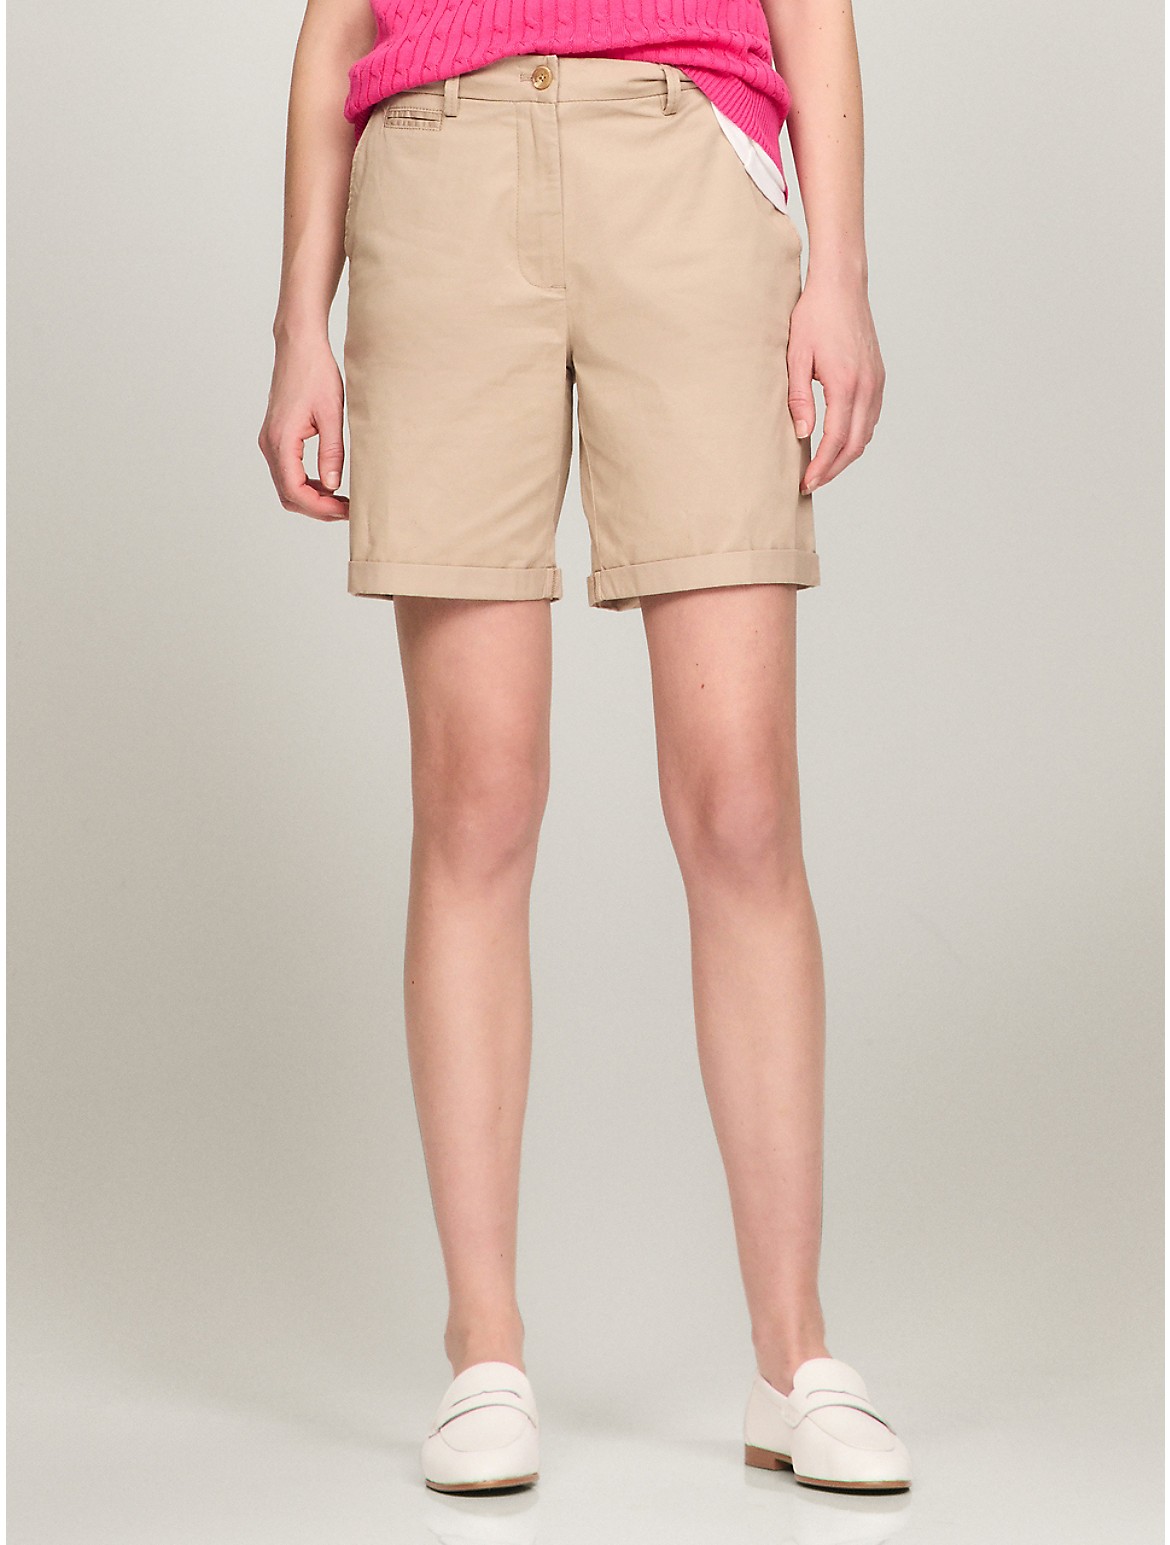 Tommy Hilfiger Women's Solid Stretch Cotton Chino 7 Short